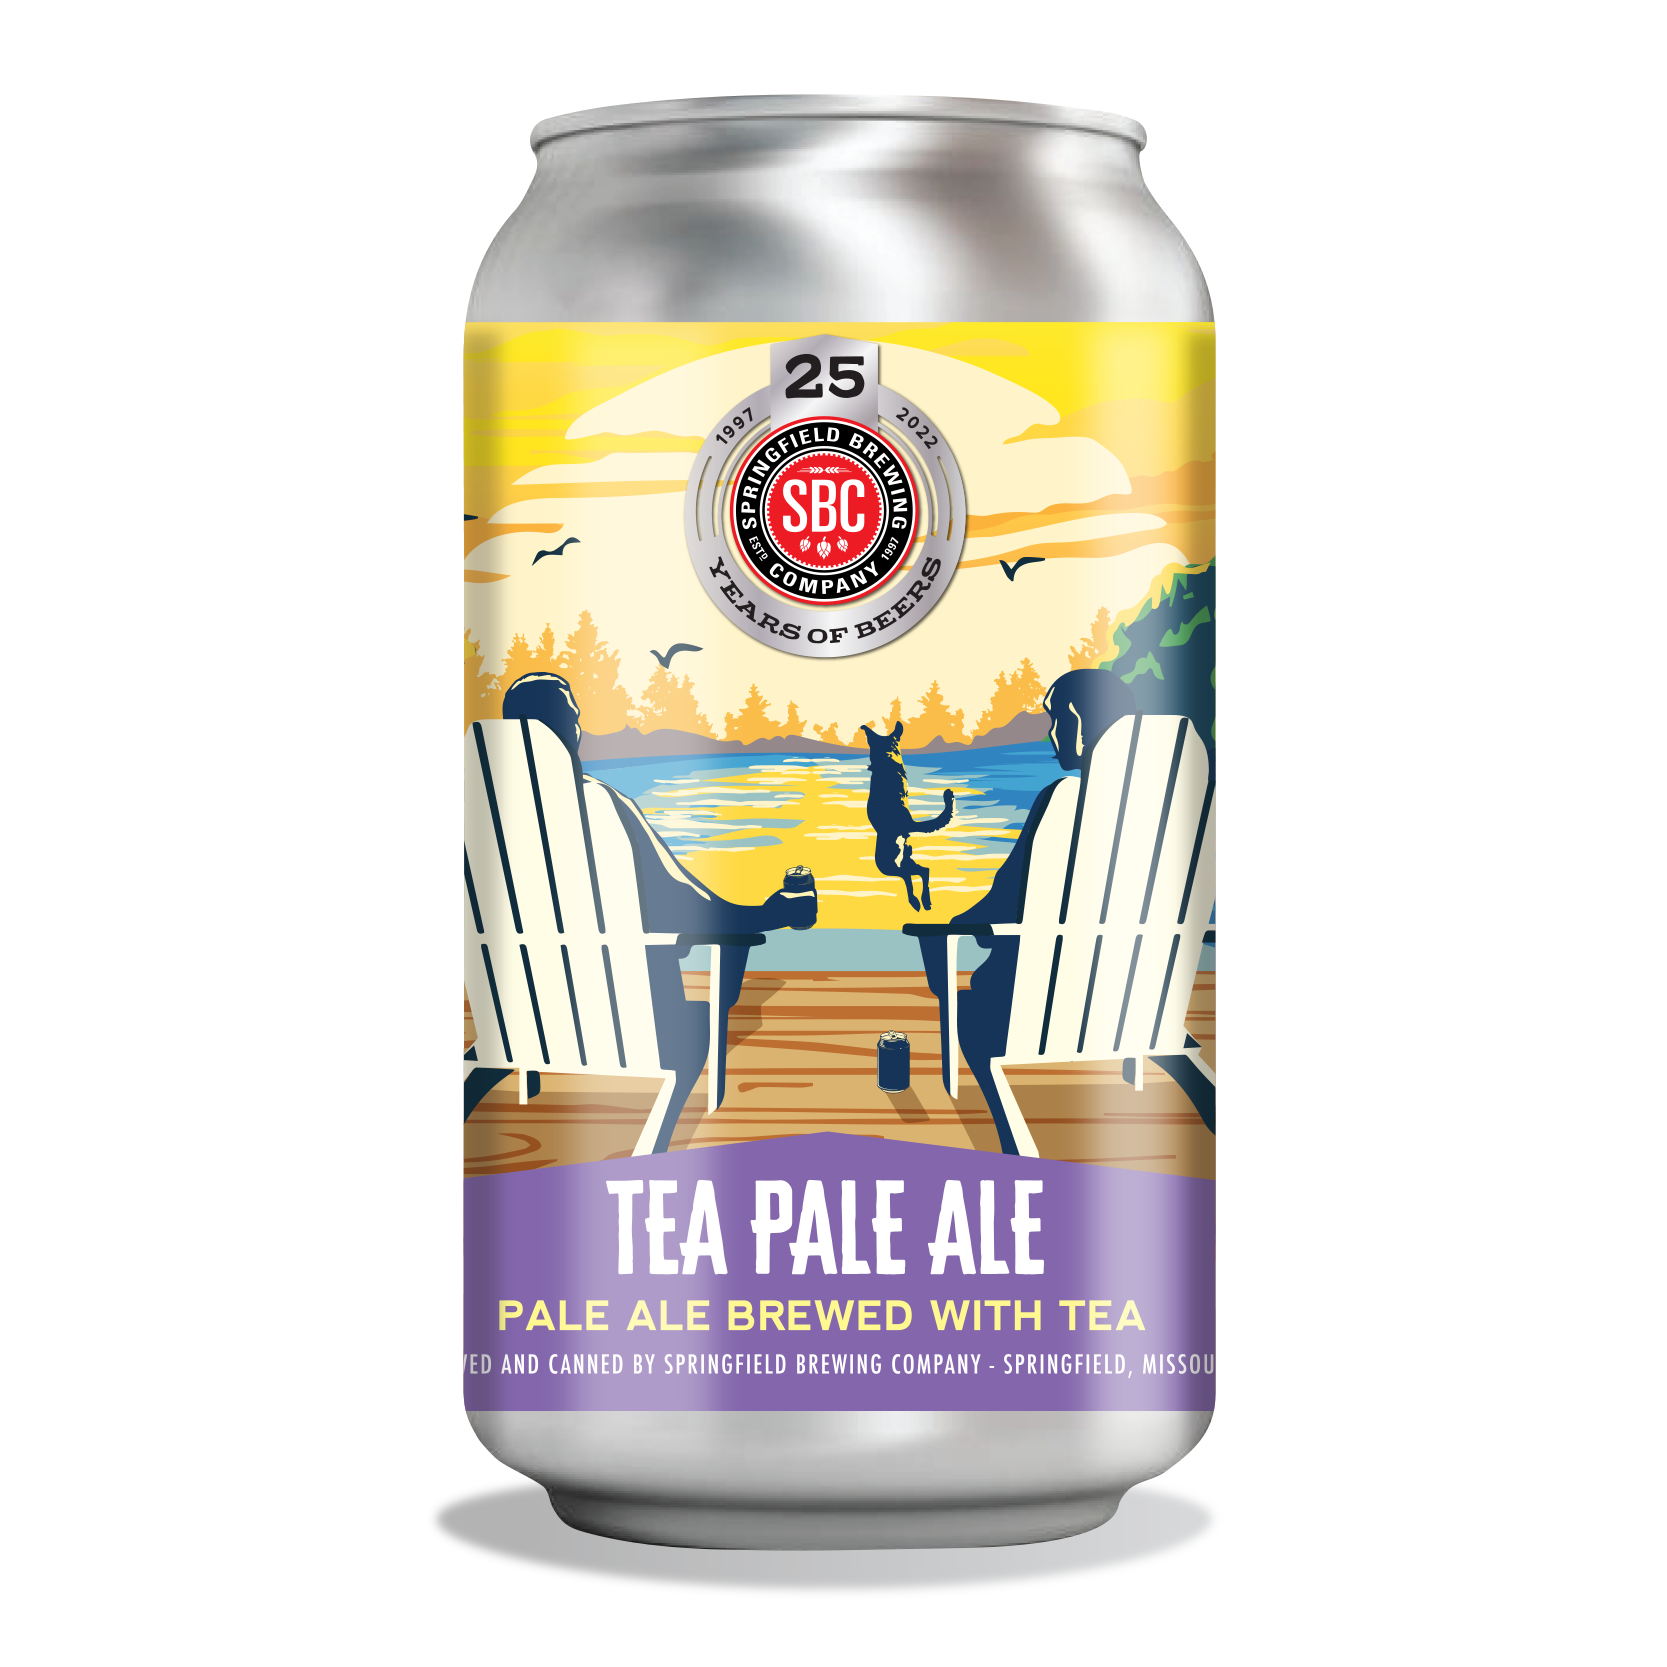 https://brewery.springfieldbrewingco.com/wp-content/uploads/2022/03/25thTeaPaleAle_CanWebsite.png